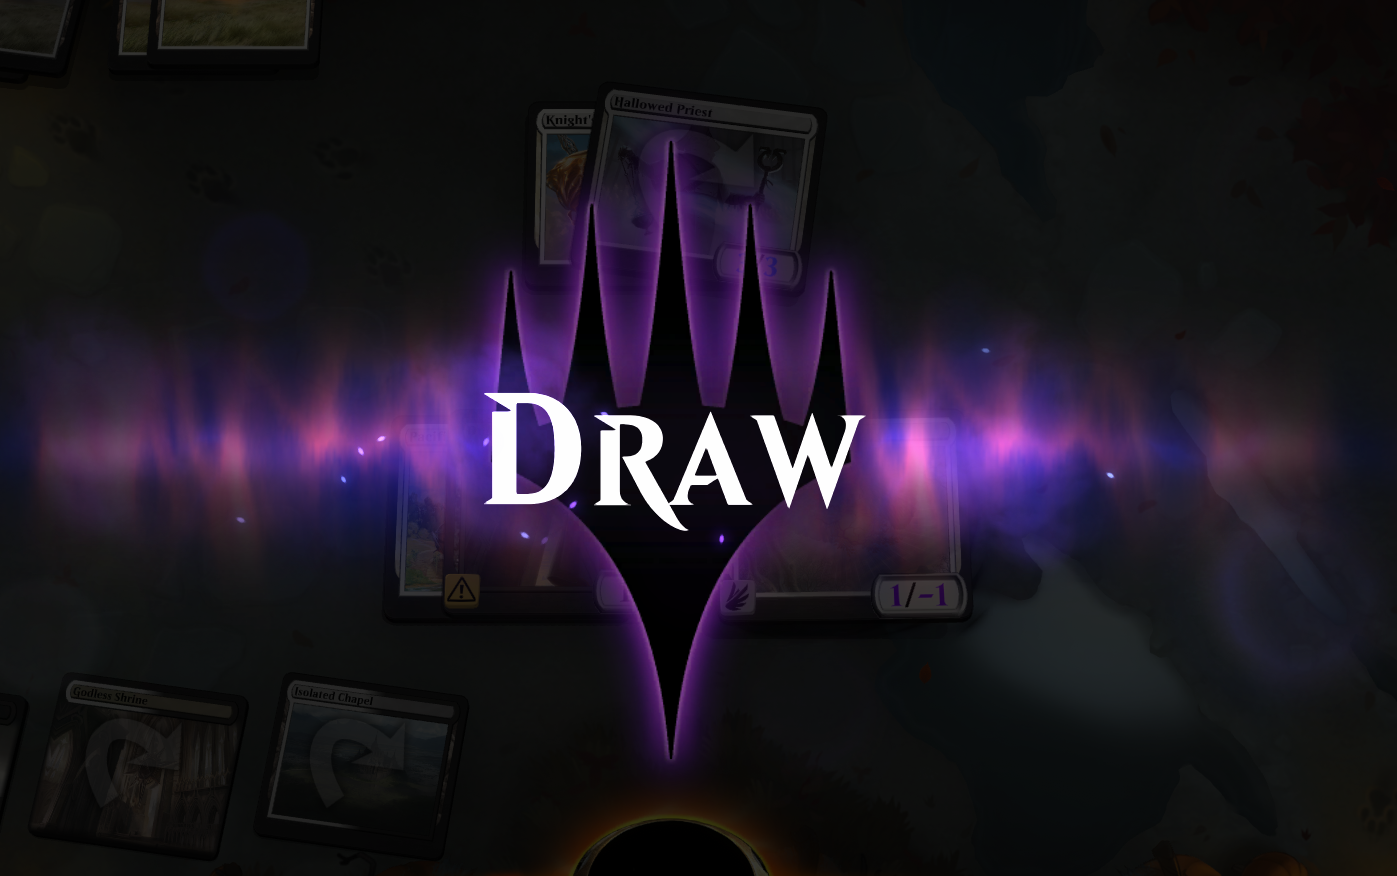 Yes, you can also draw in MTG Arena.